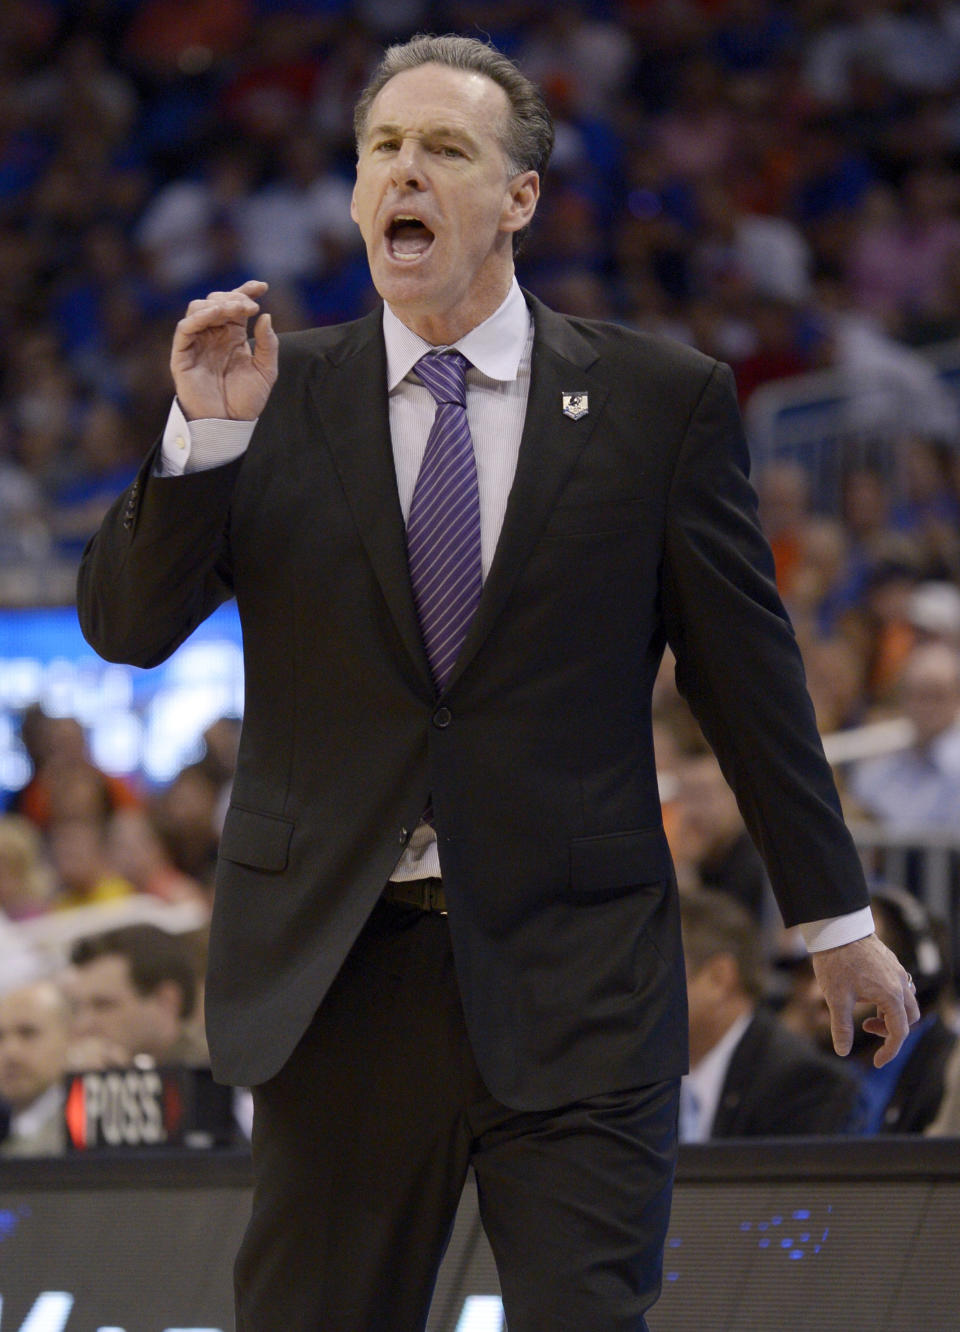 Pittsburgh head coach Jamie Dixon gestures during the first half in a third-round game in the NCAA college basketball tournament against Florida, Saturday, March 22, 2014, in Orlando, Fla. (AP Photo/Phelan M. Ebenhack)